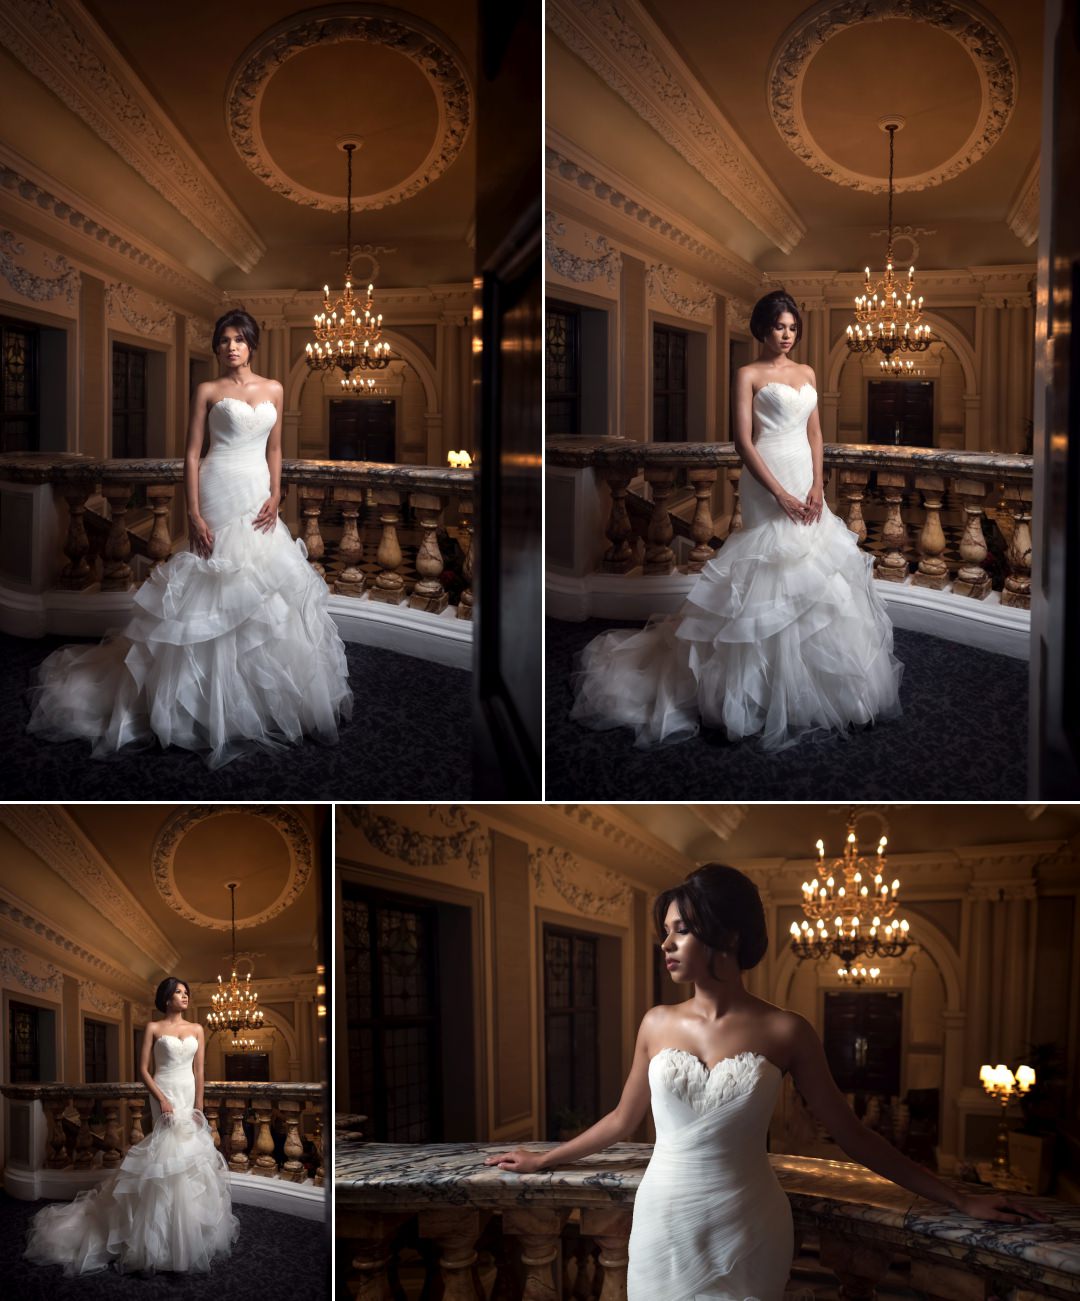 stunning Asian bride at De Vere Grand Connaught Rooms wedding 